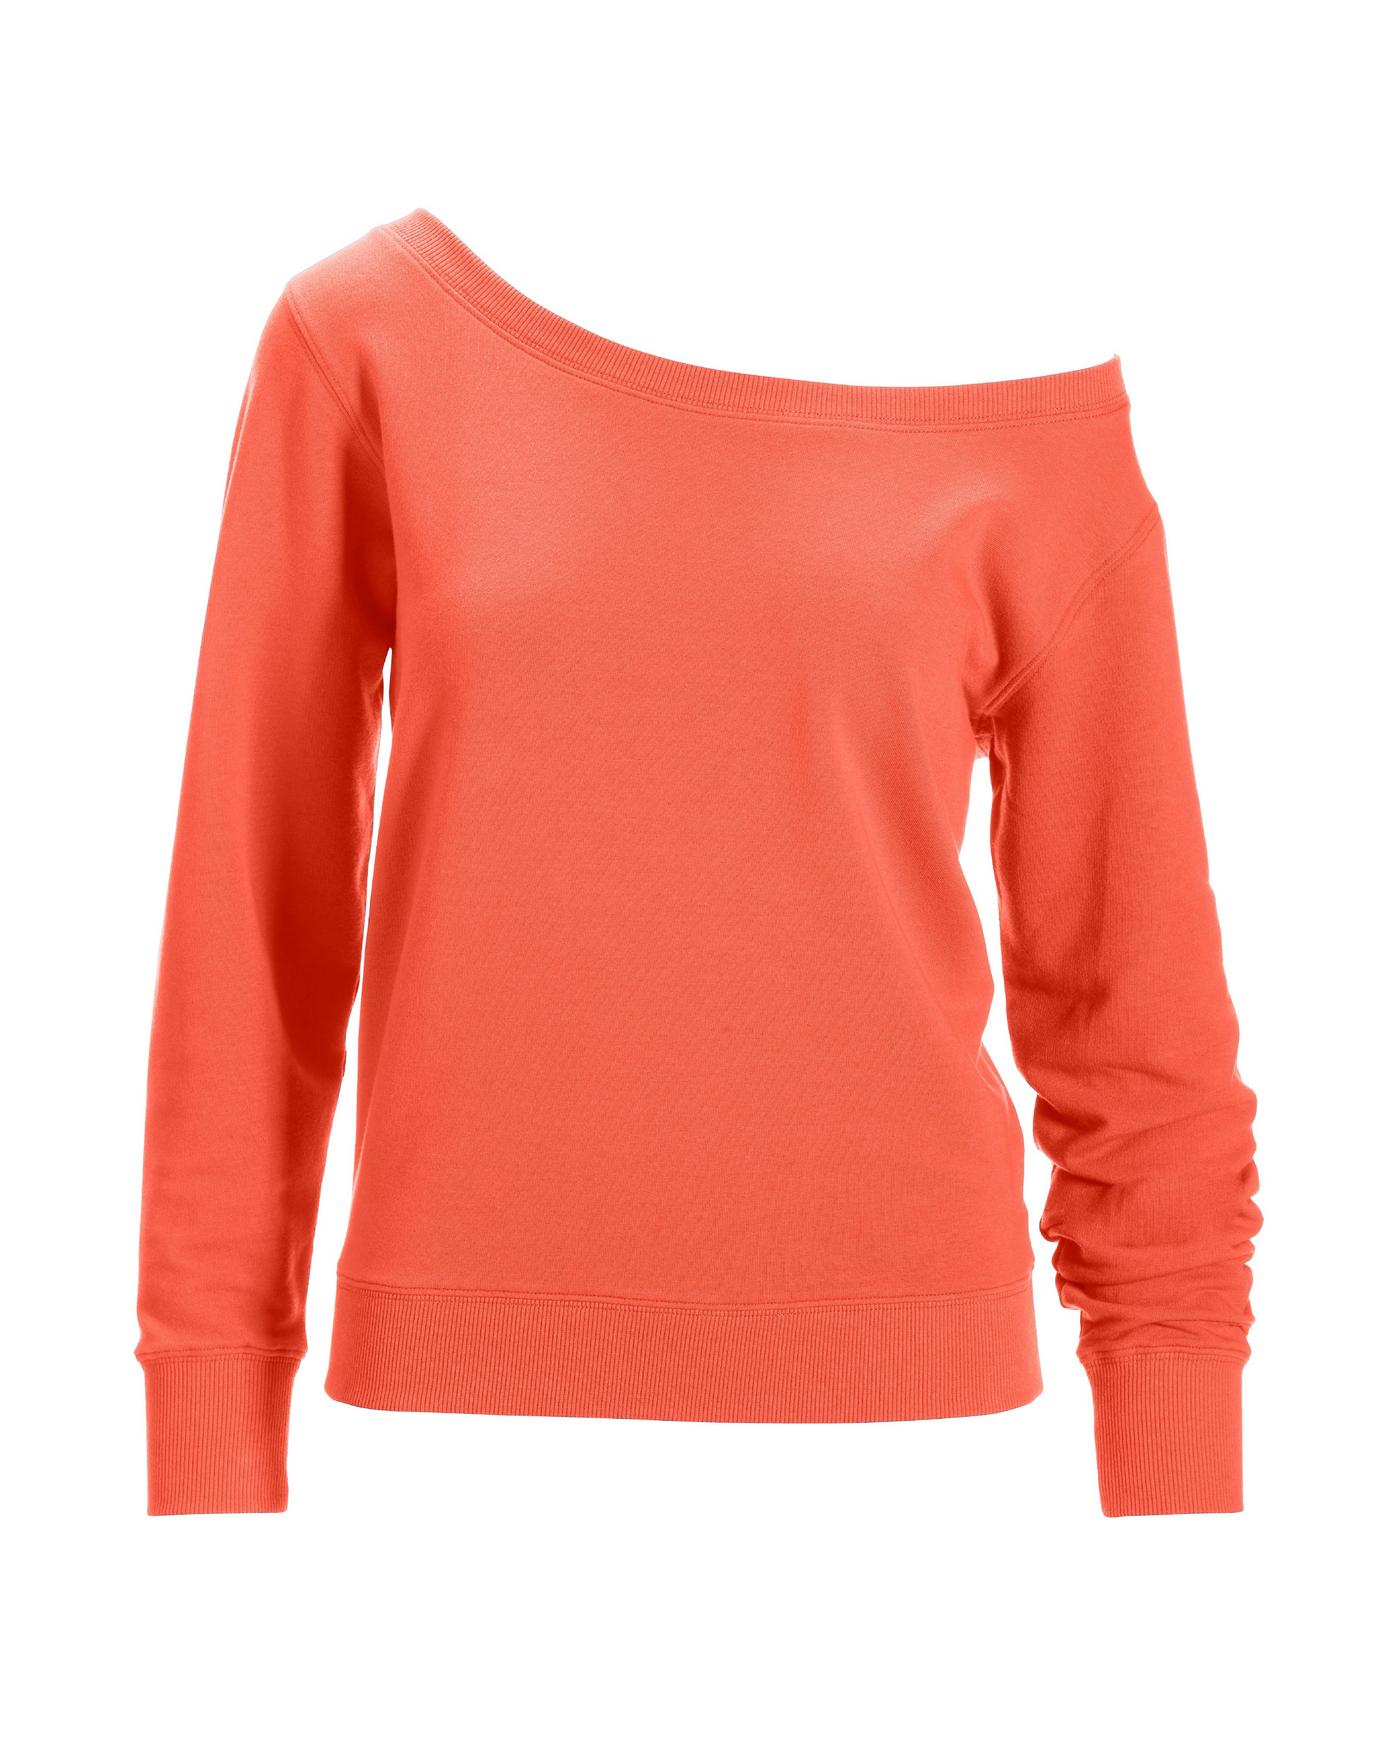 Coral Slouchy Pullover Proper Hot - Sweatshirt French | Orange Terry Boston